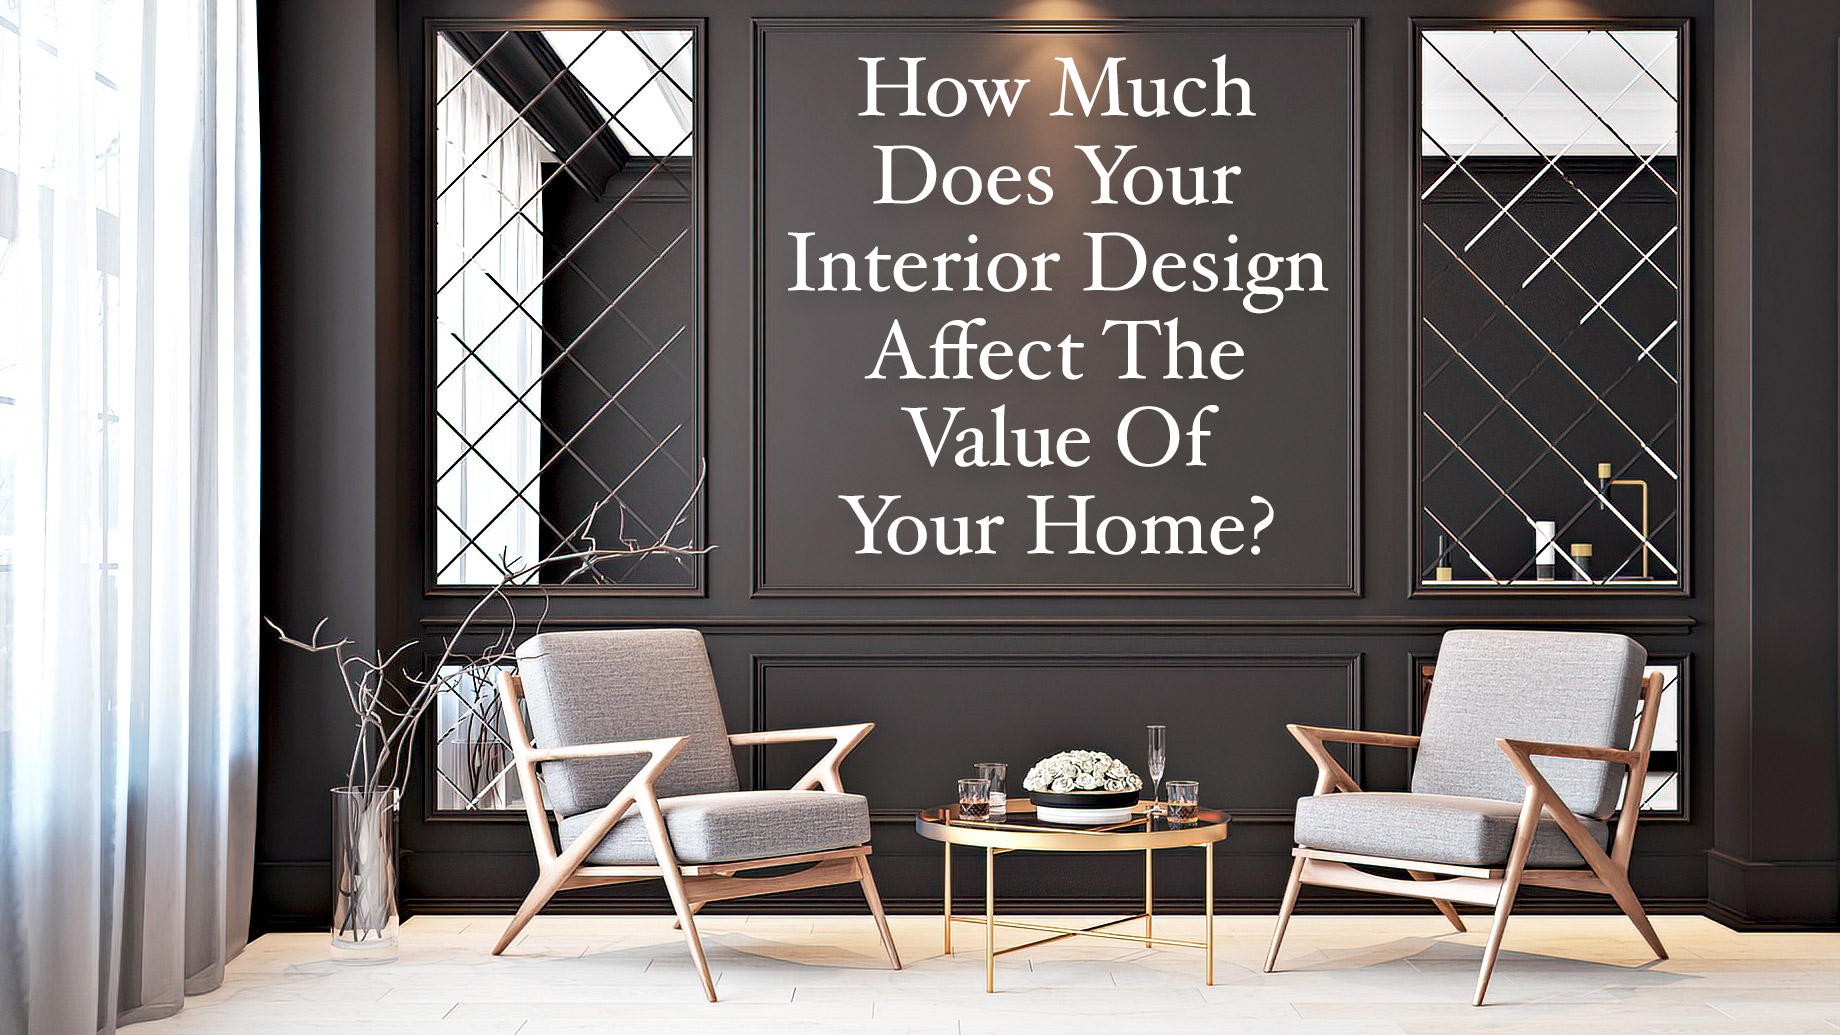 How Much Does Your Interior Design Affect The Value Of Your Home?